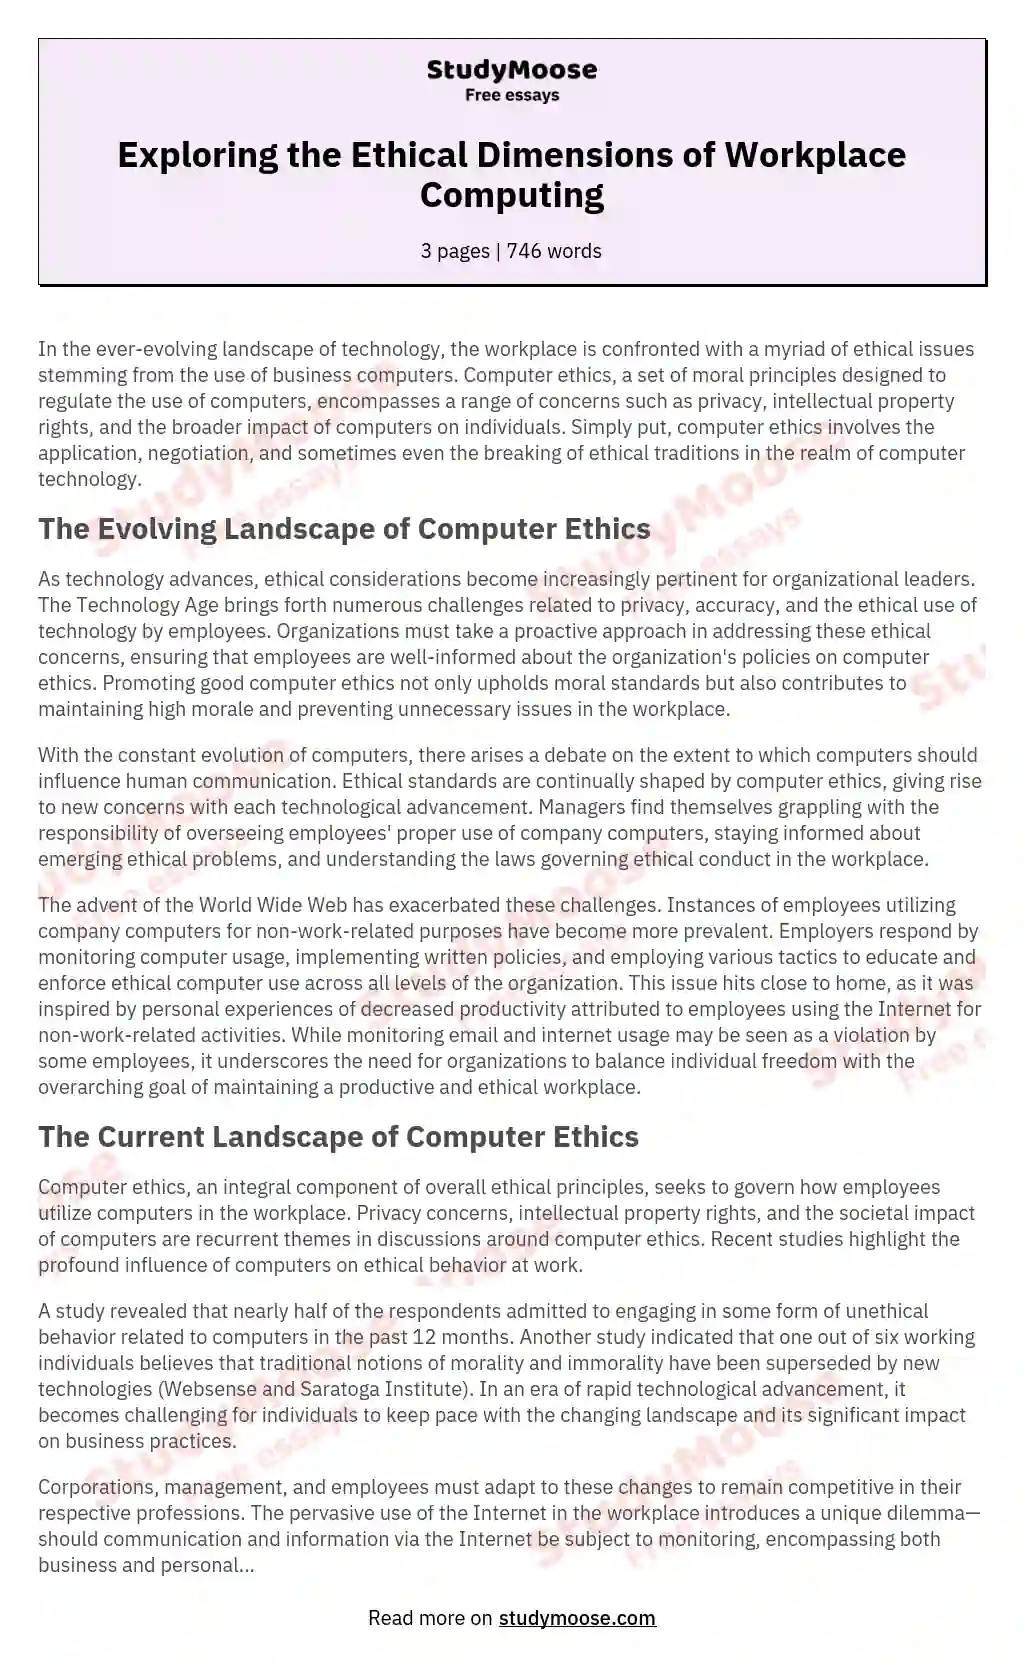 Exploring the Ethical Dimensions of Workplace Computing essay